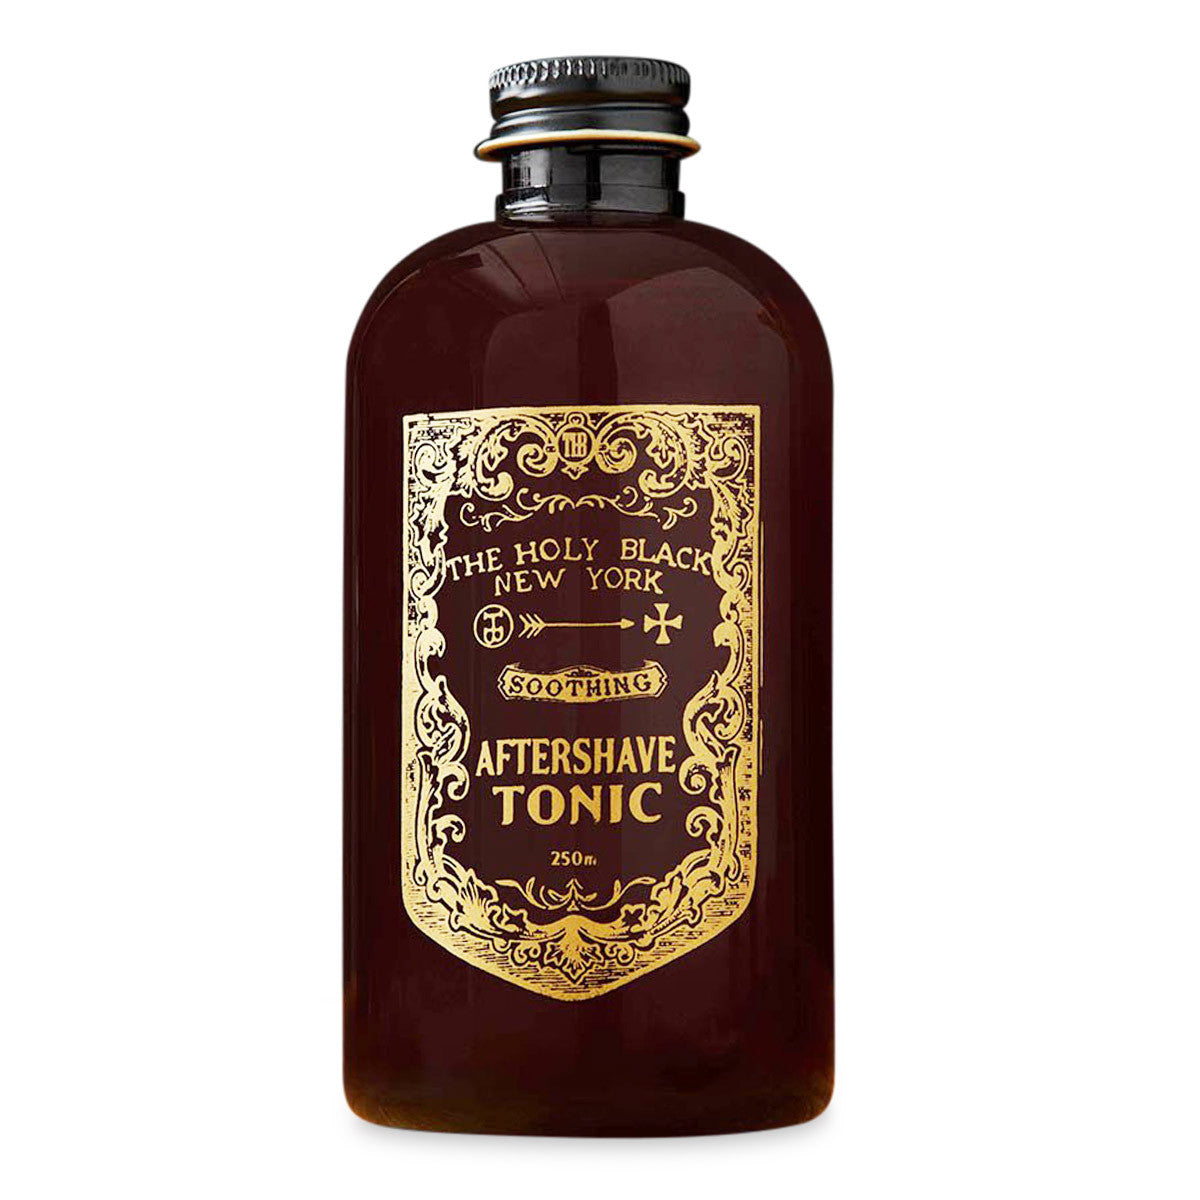 Primary image of Aftershave Tonic